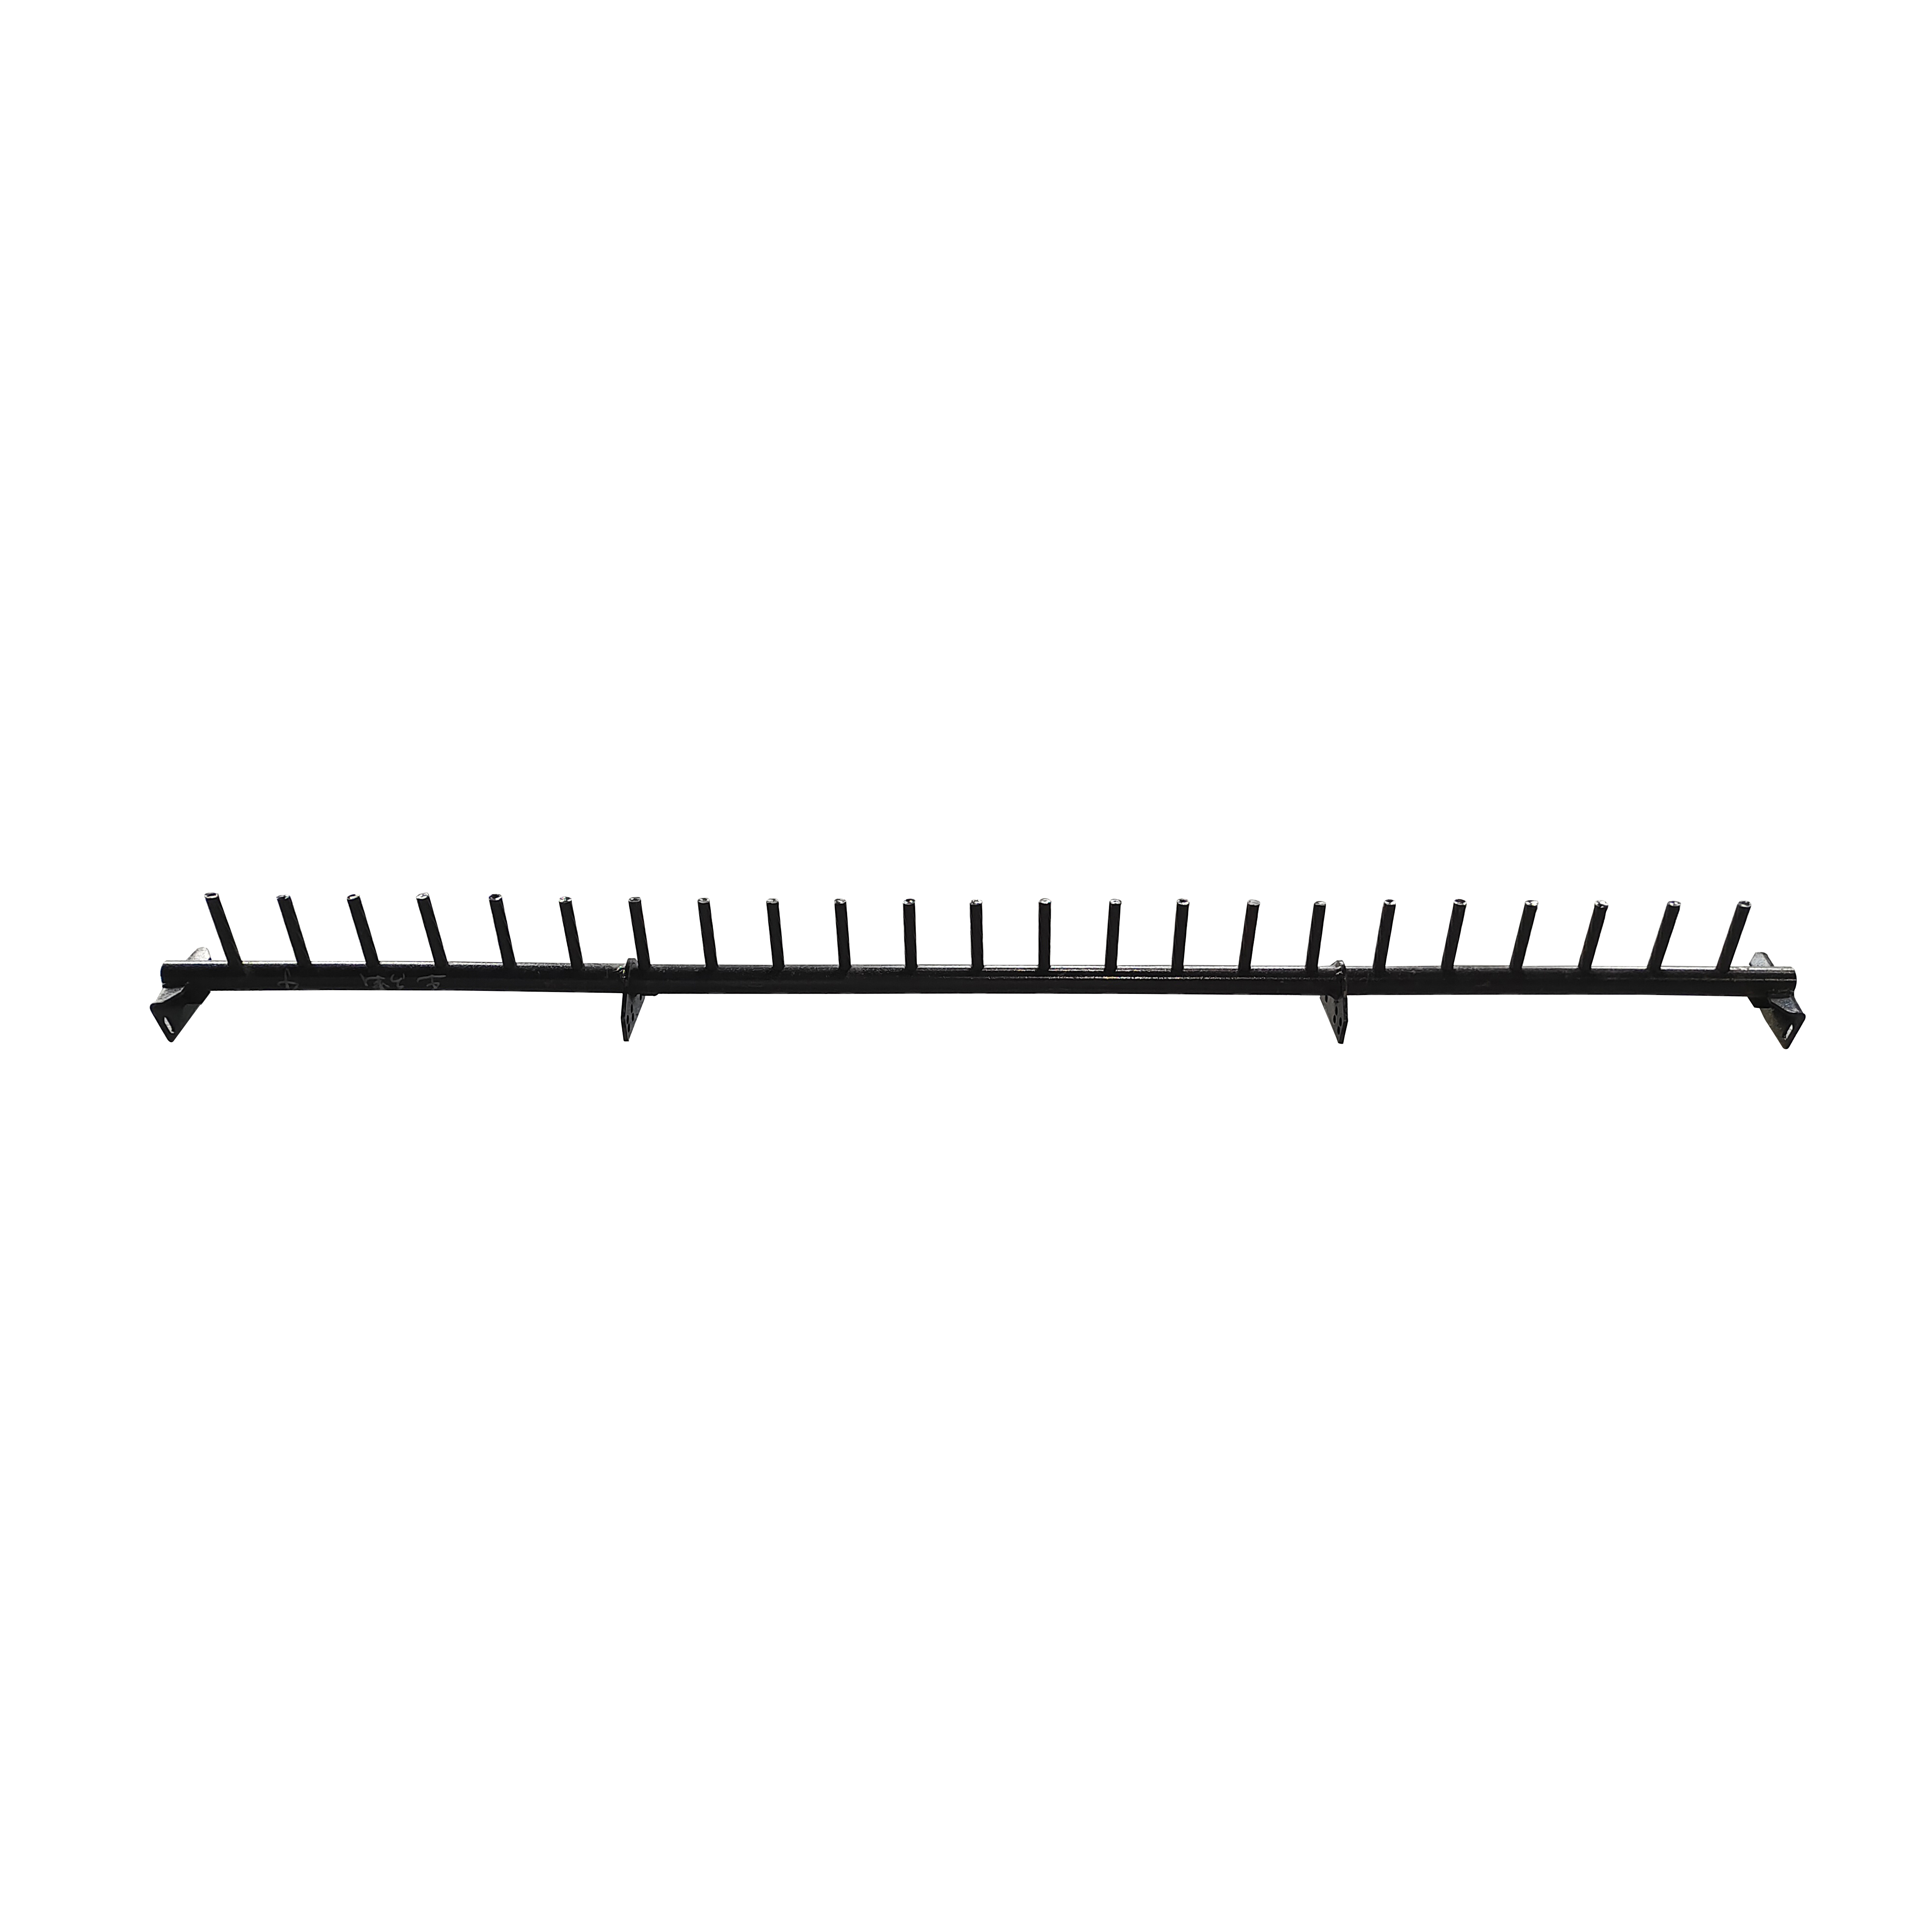 ZOOMLION 4LZ-4.0/5.0 harvester parts CD40ZQ.2.2.1B.2 Welding of toothed bar 1 tooth bar